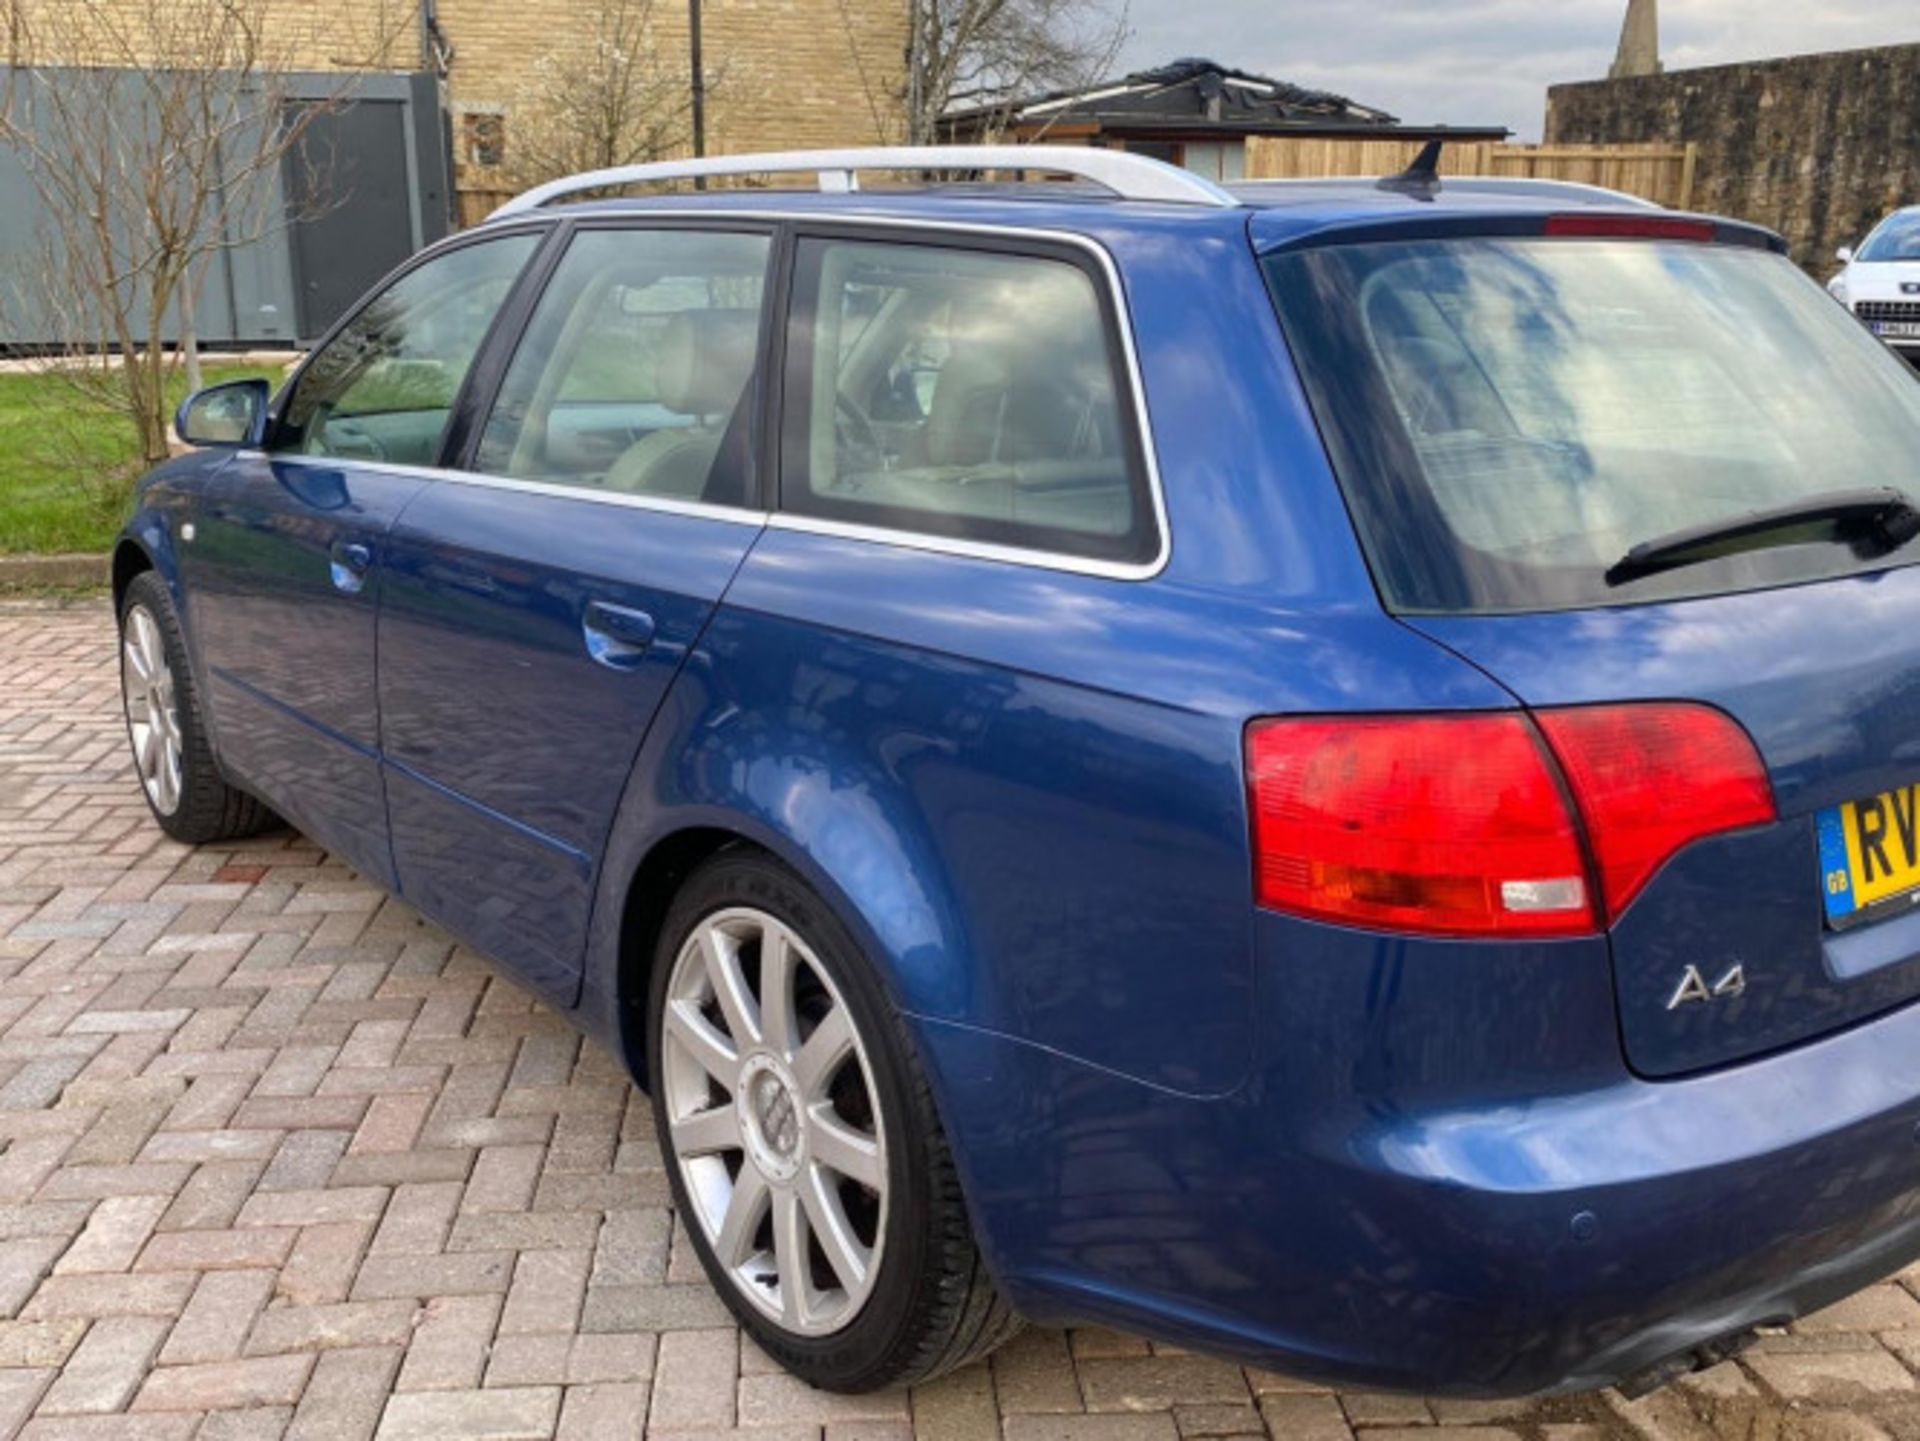 AUDI A4 AVANT 1.9 TDI SE 5DR ESTATE - RARE AND RELIABLE LUXURY WAGON >>--NO VAT ON HAMMER--<< - Image 83 of 97